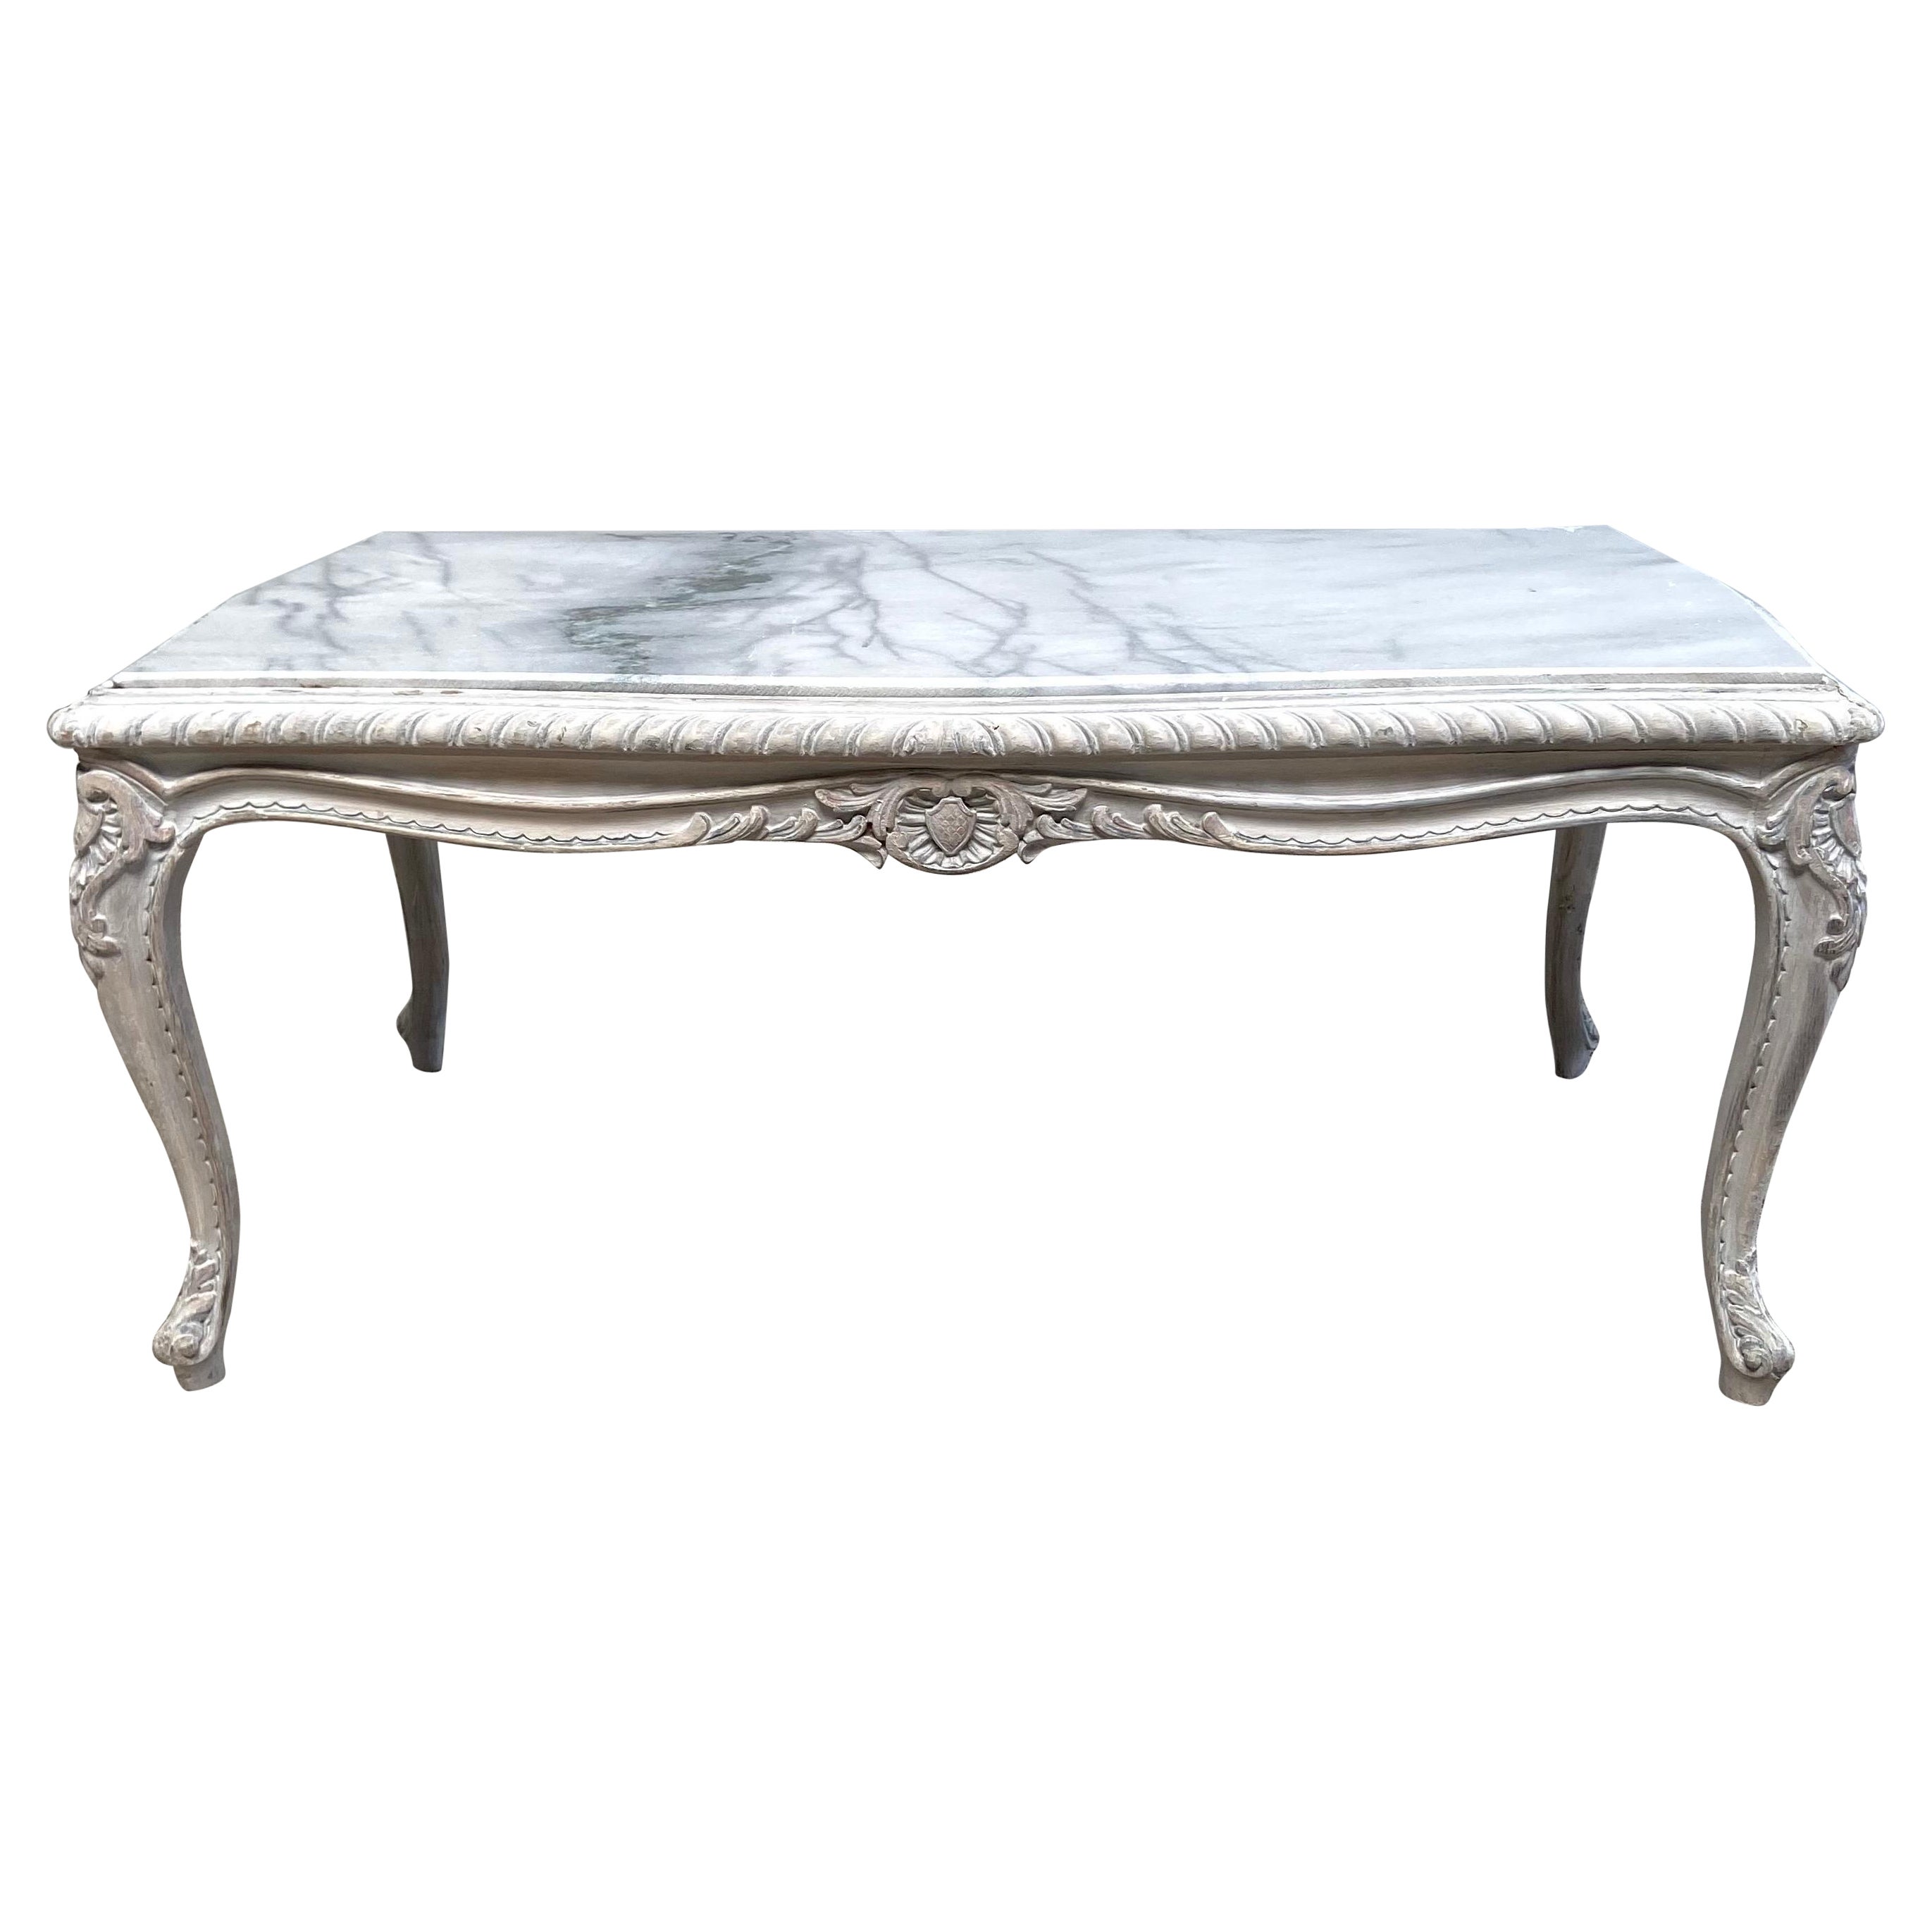 Vintage French Inspired Painted Coffee Table with Marble Top